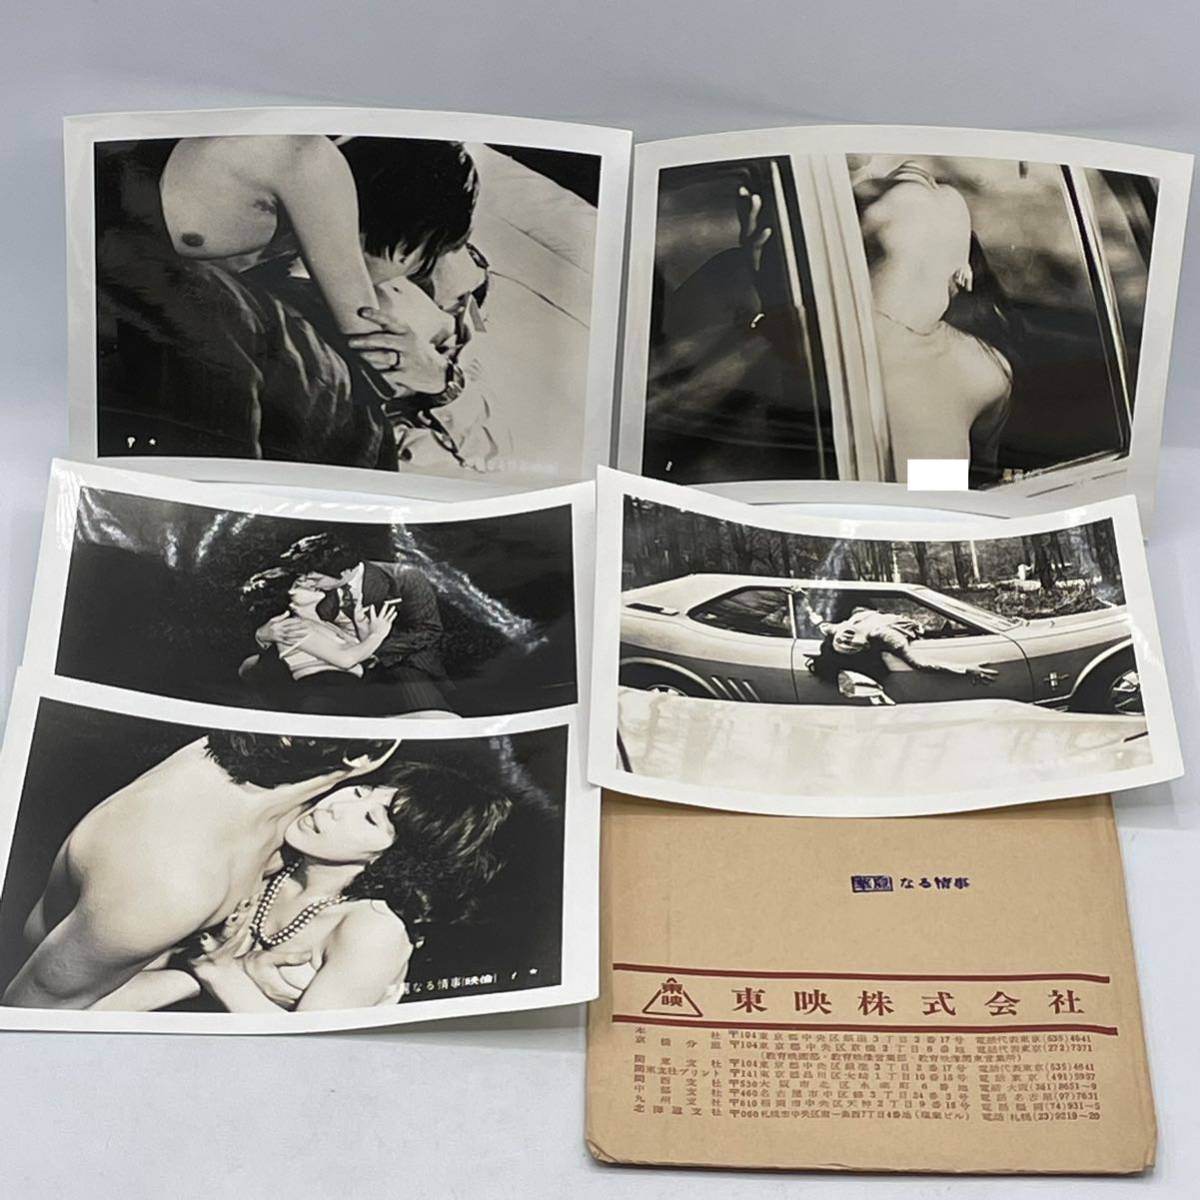 ★Very rare!!★ Movie The Great Love Affair / Still photo set / Photo / No color / Showa retro / Original / Not for sale / Envelope included / Hard to find, movie, video, Movie related goods, photograph